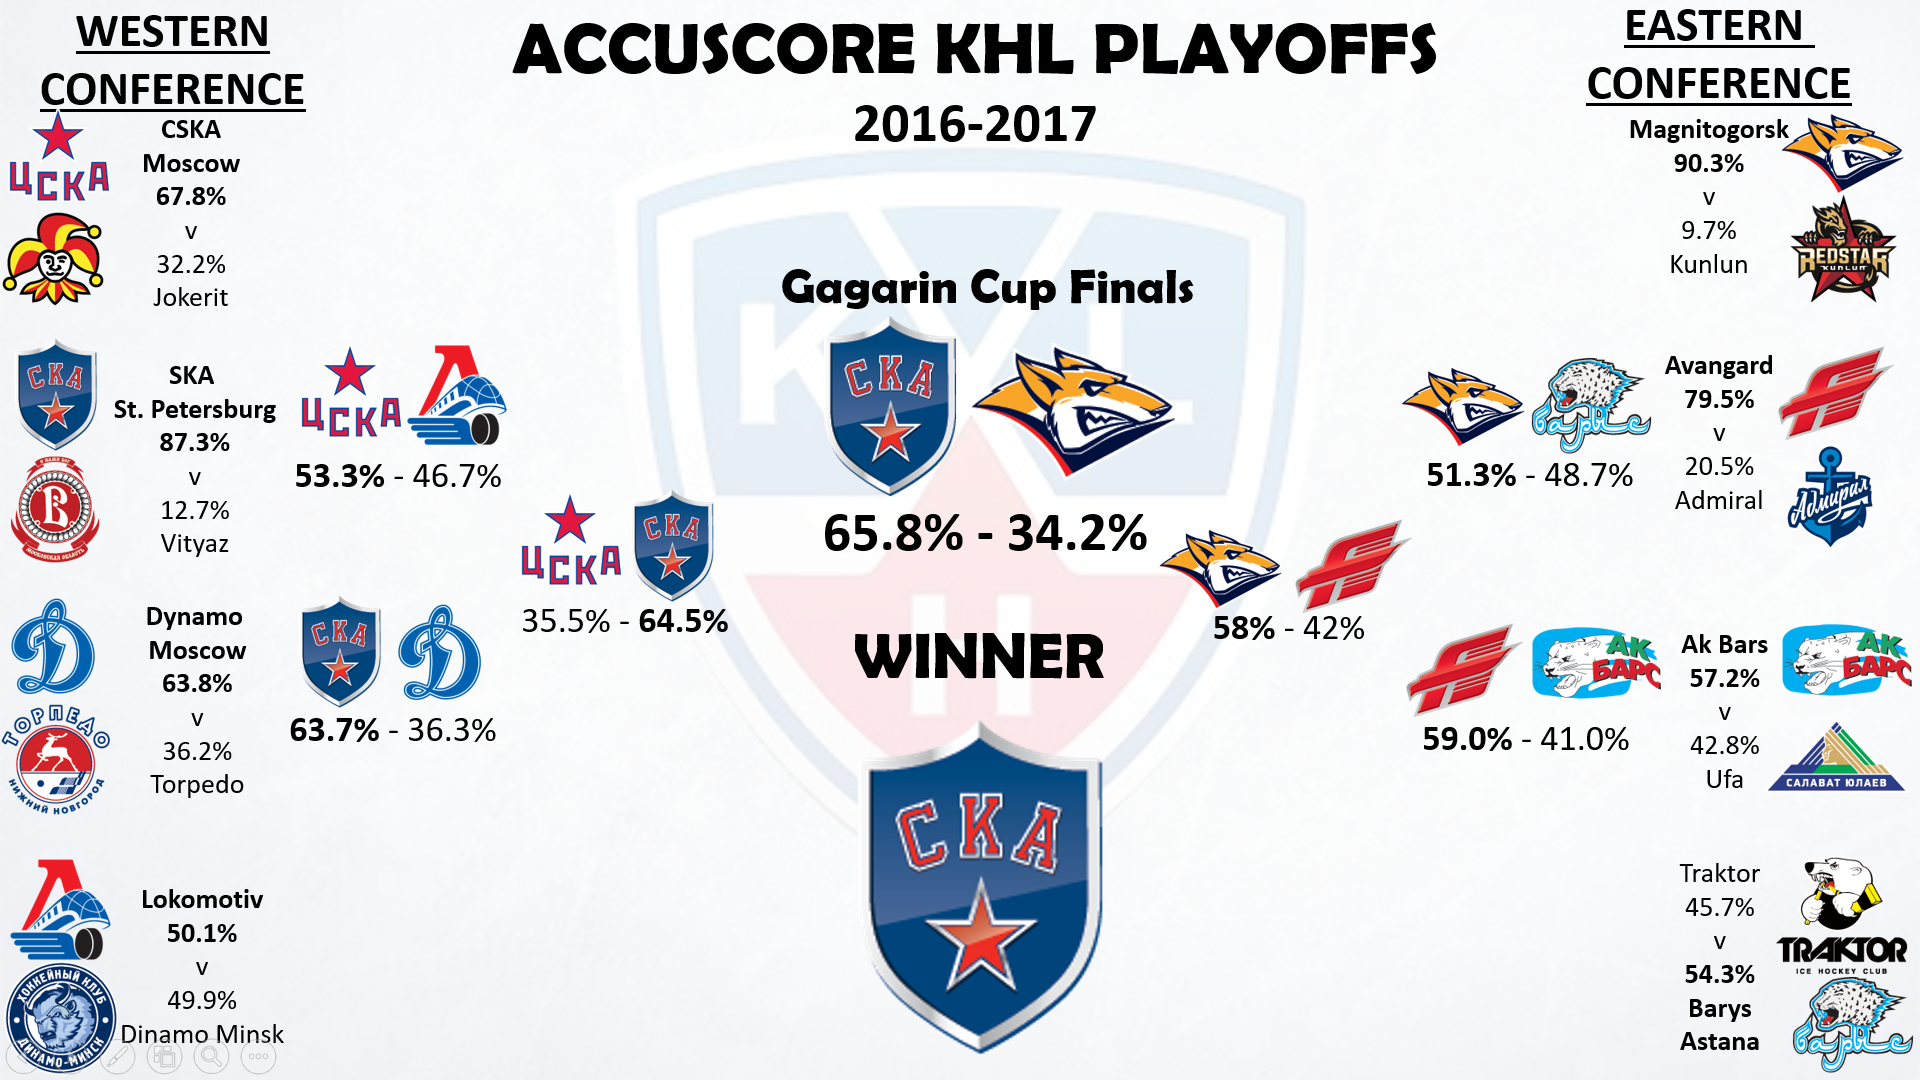 Accuscore's KHL Playoffs Prediction for season 2016-2017